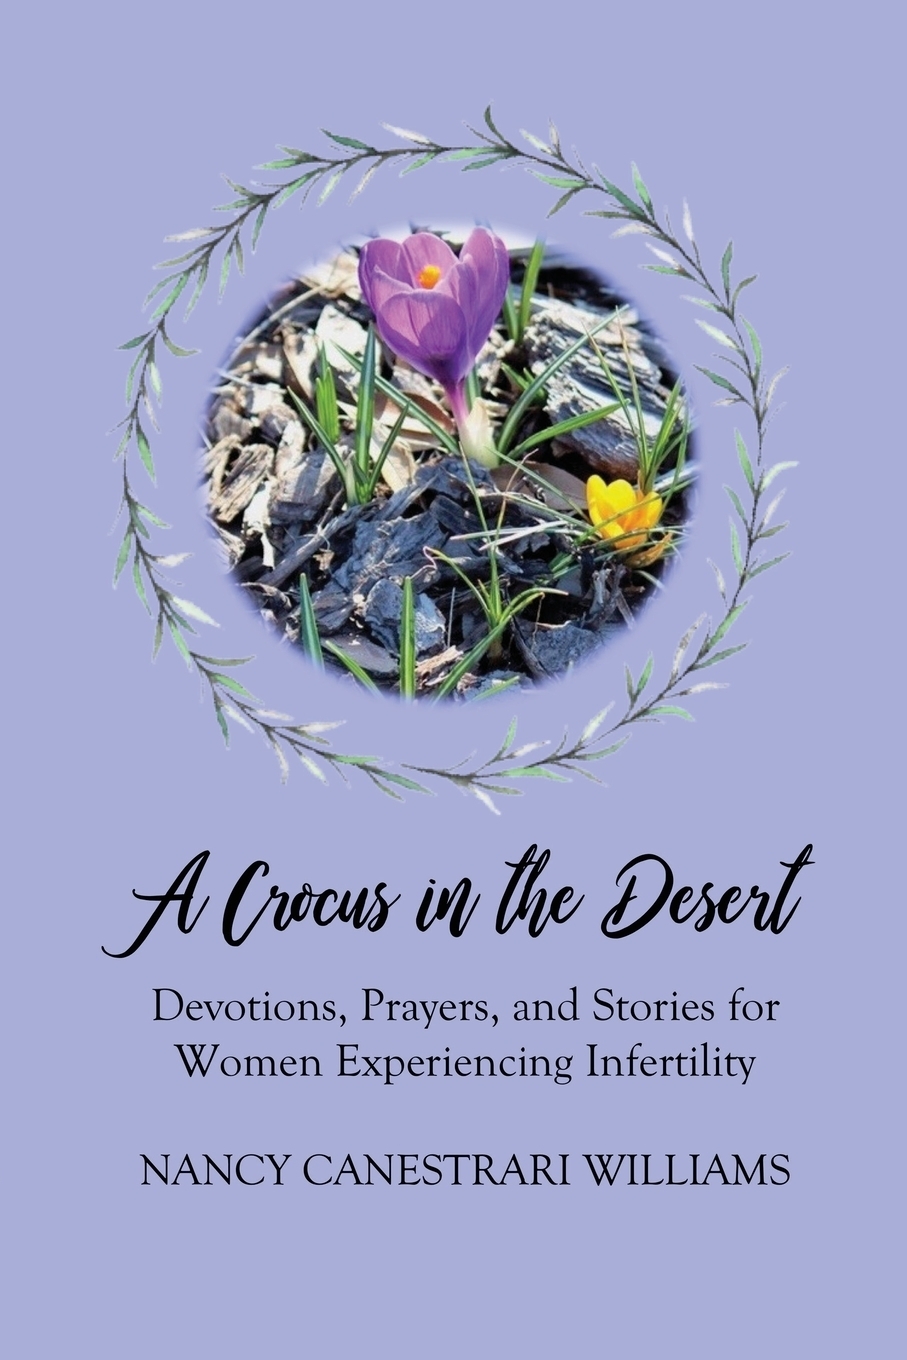 A Crocus in the Desert. Devotions, Prayers, and Stories for Women Experiencing Infertility